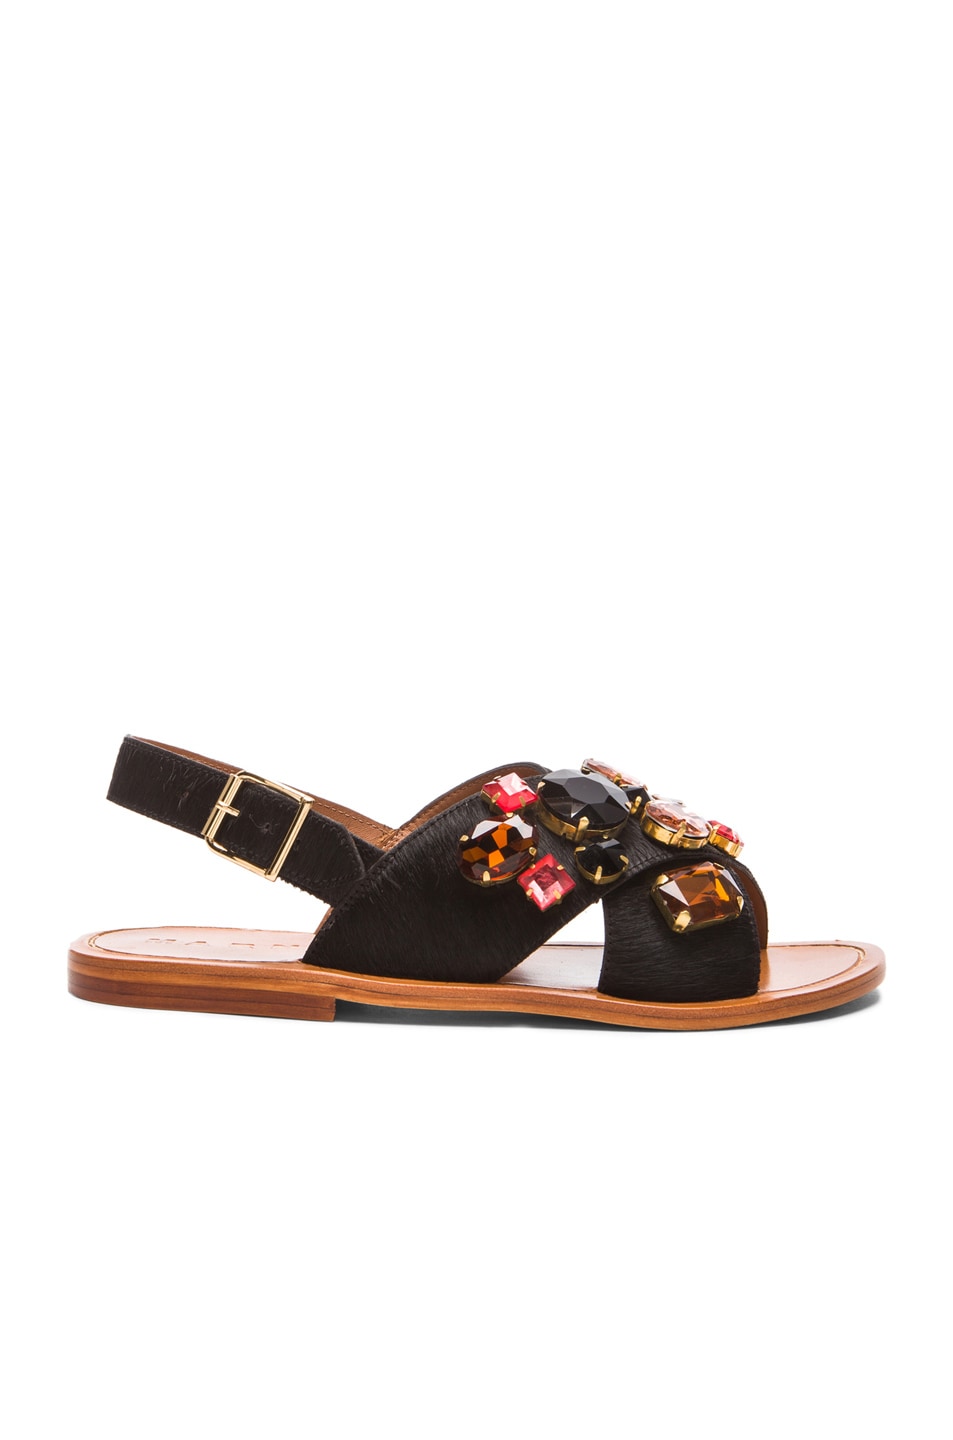 Image 1 of Marni Embellished Criss Cross Calf Hair Sandals in Coal